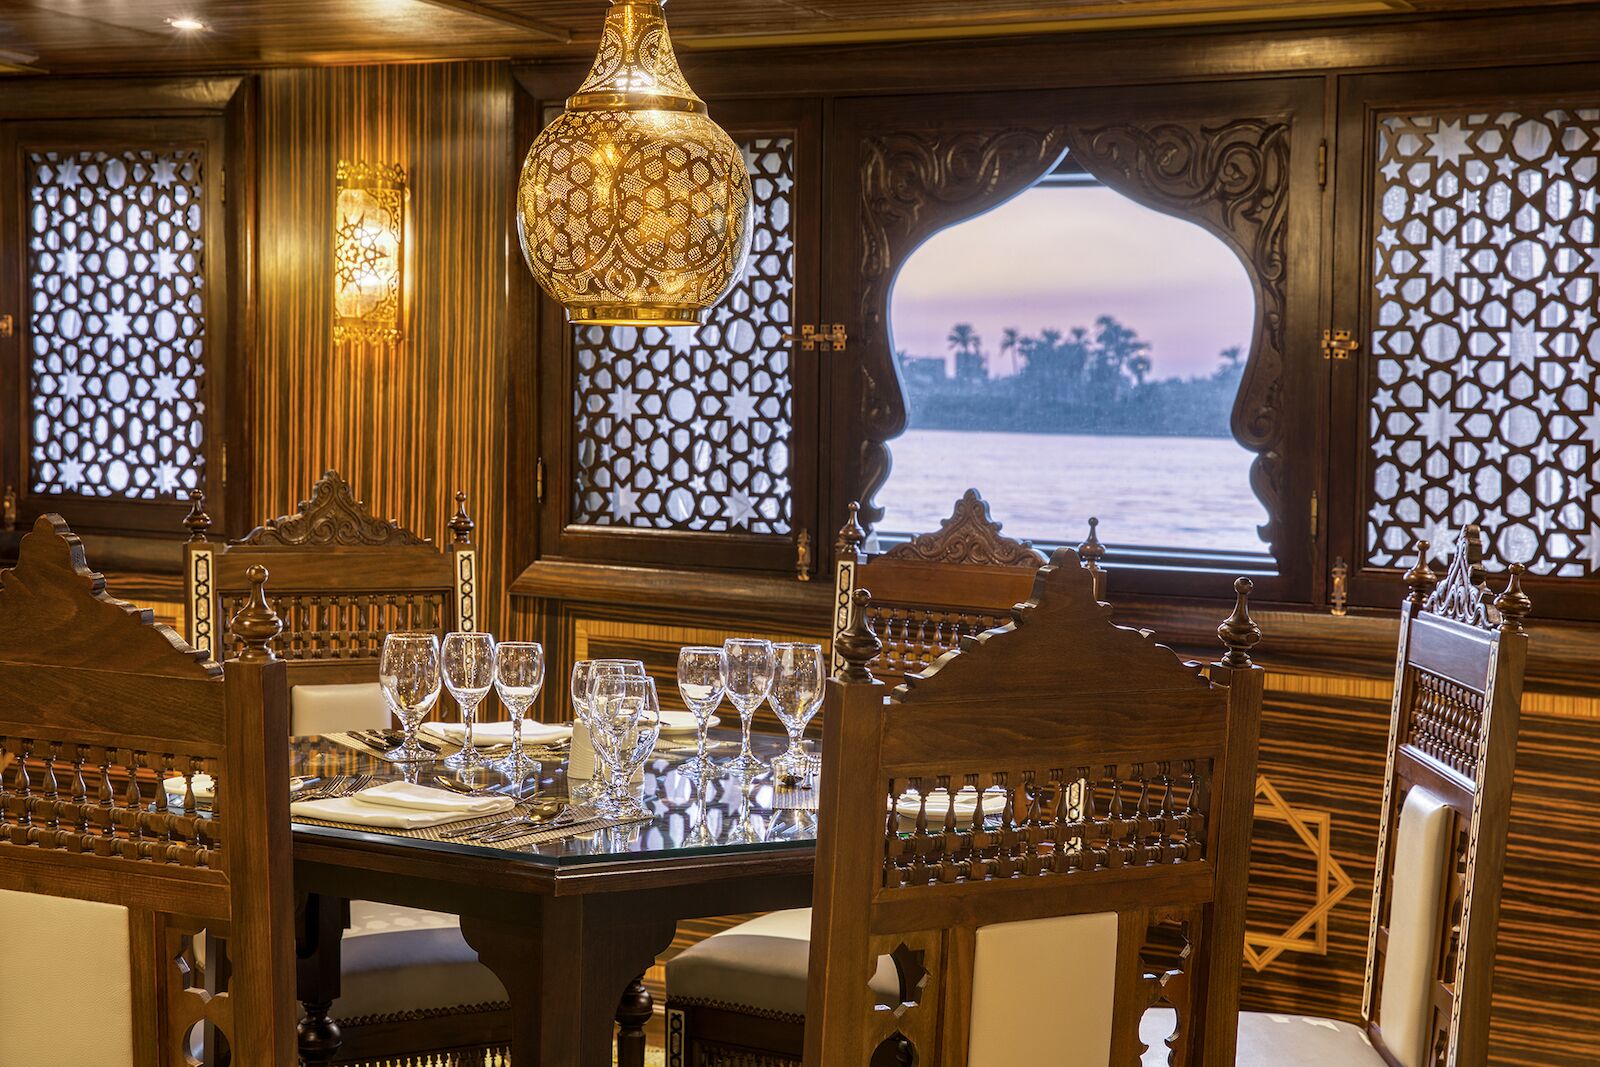 Restaurant of the S.S.Sphinx, a luxurious ship for an Egyptian river cruise on the Nile